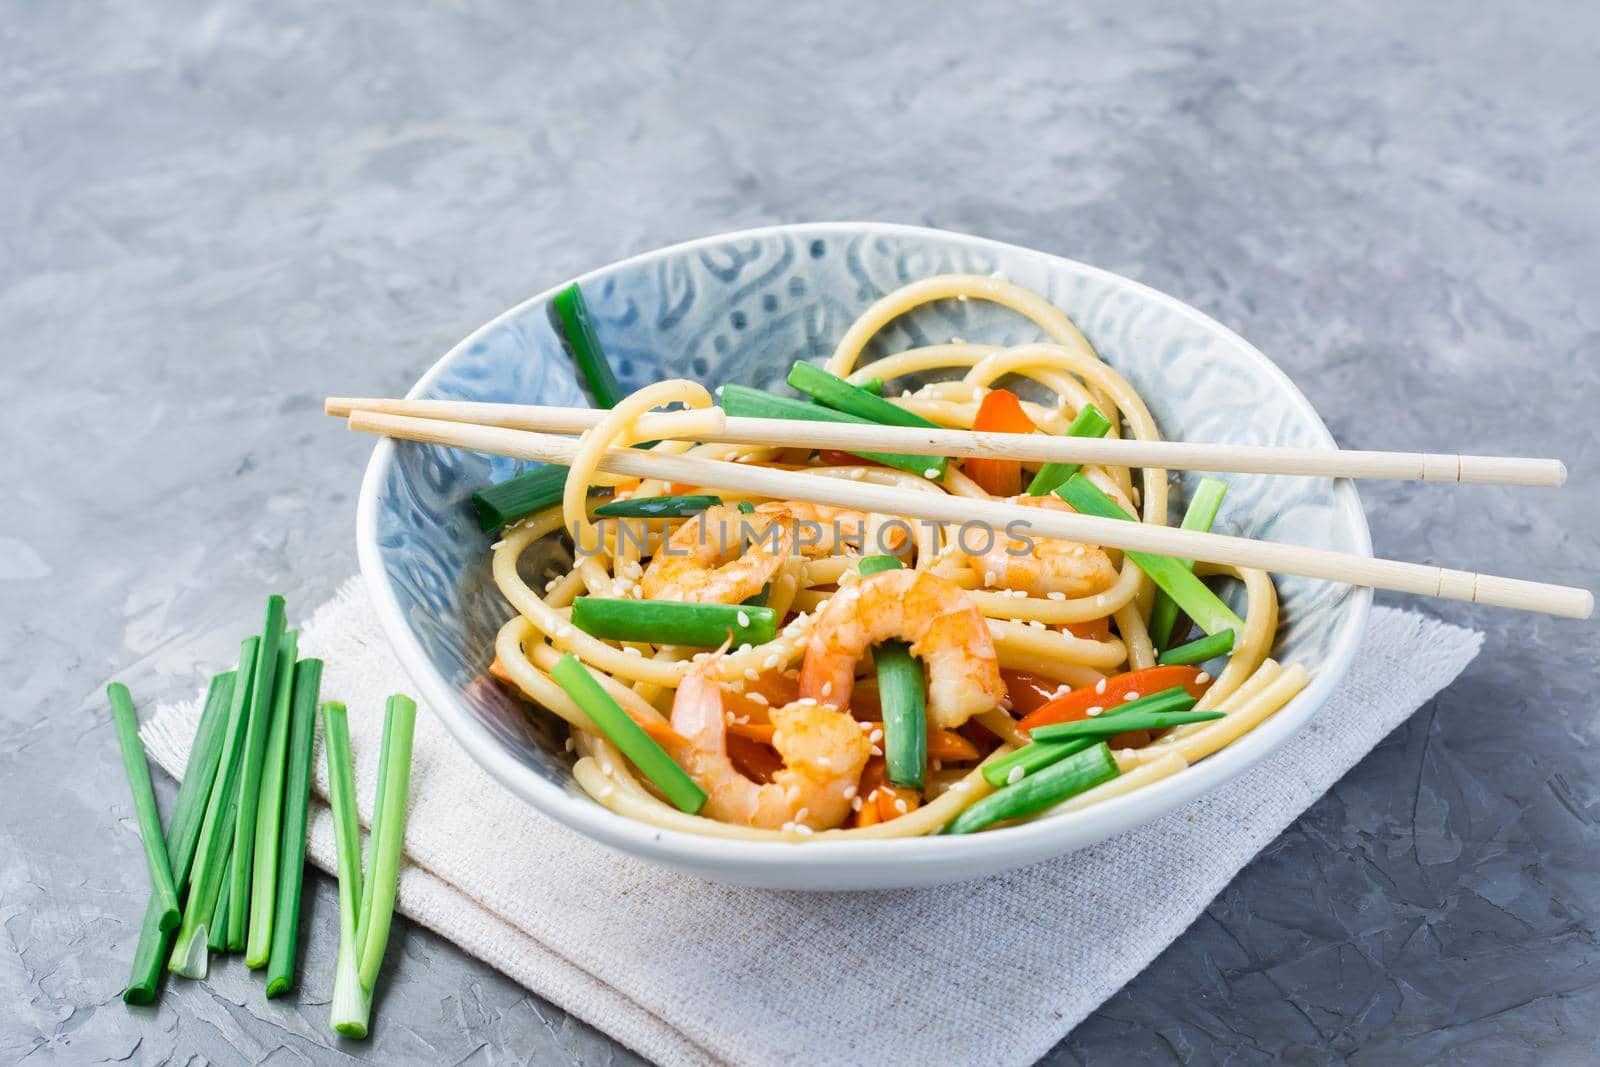 Ready to eat udon and wok noodles with prawns, peppers and onions in a plate and chopsticks on the table. Chinese food by Aleruana